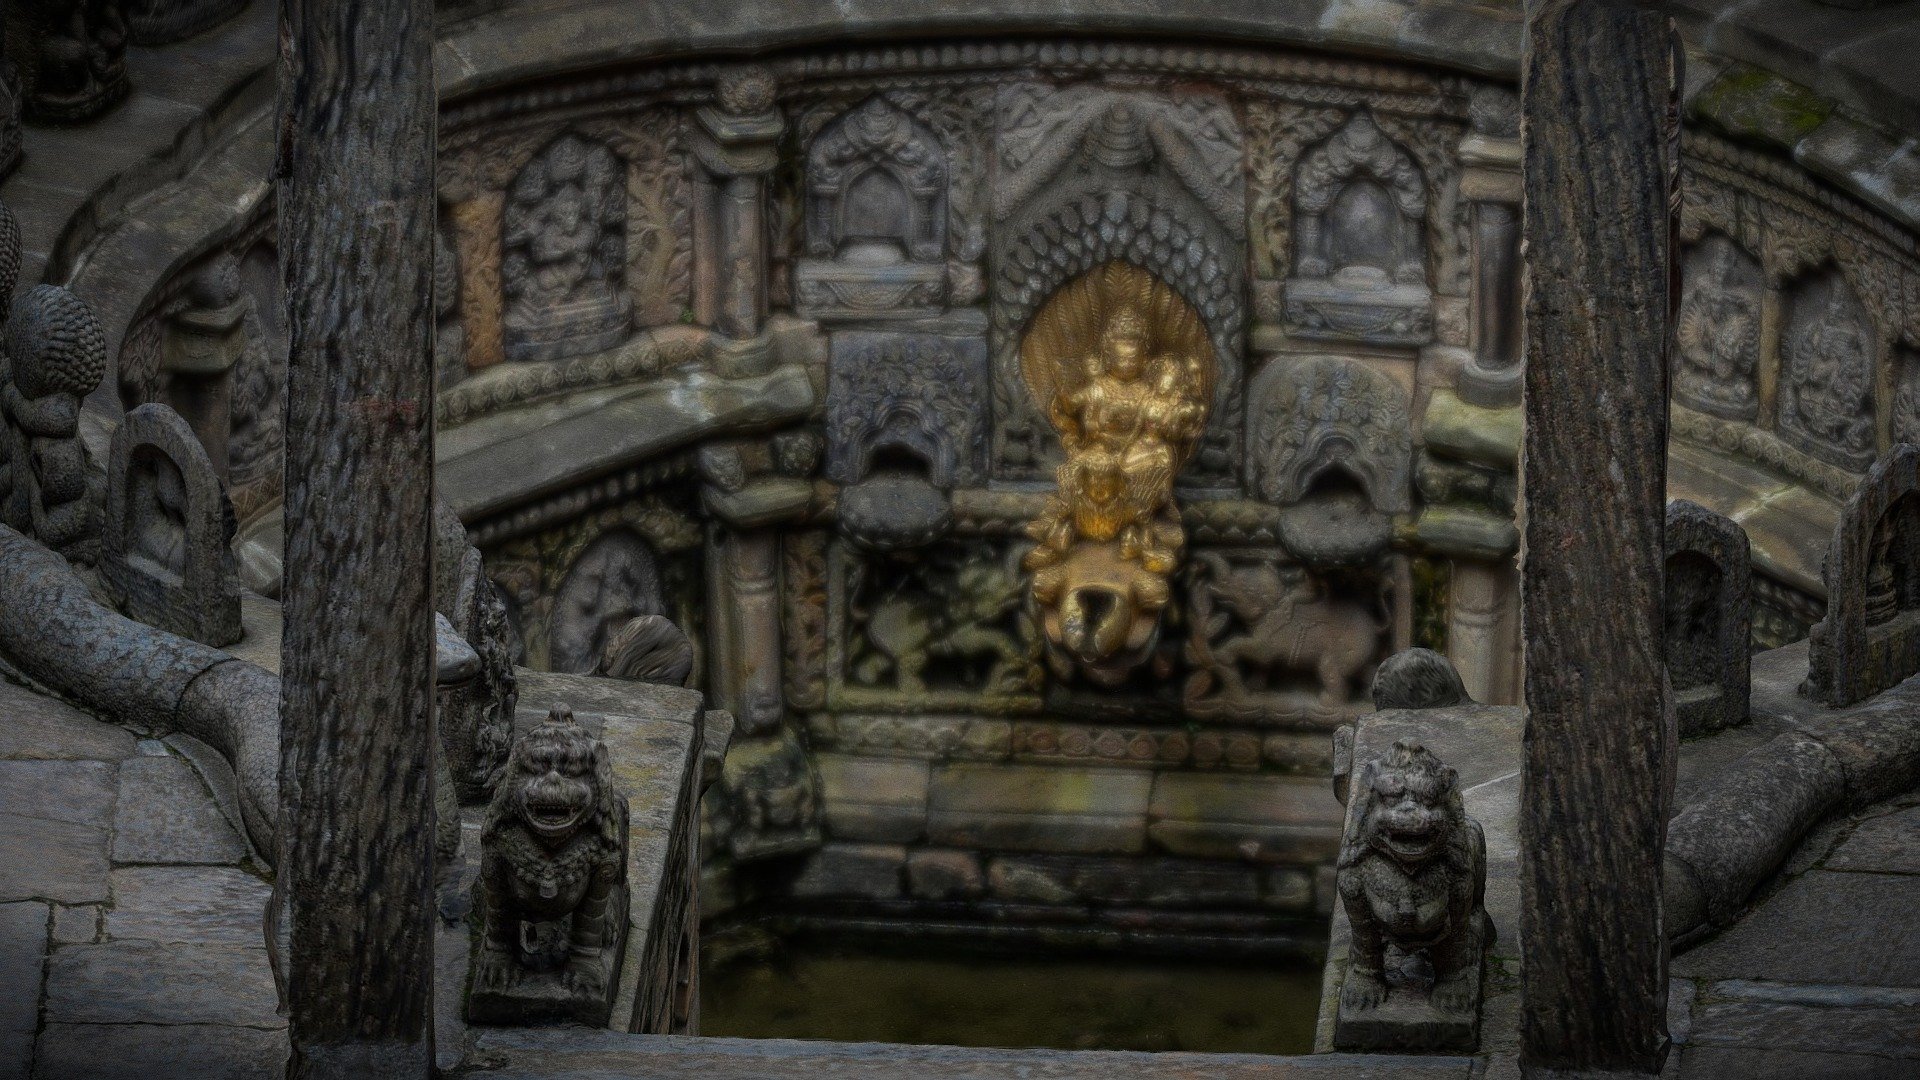 This is Tusa hiti located in Sundar Chowk(Patan Durbar Square). It is slightly cusped Tusha Hiti step-well was commissioned in 1647 by King Siddhinarasimha Malla, to perform ritual purification. A beautiful statue of Laksmi-Narayan on Garuda is carved on gilt bronze on the top of water spout. Various miniature statues of gods and goddesses and multiple iconic objects are surrounded in Tusha Hiti 3d model